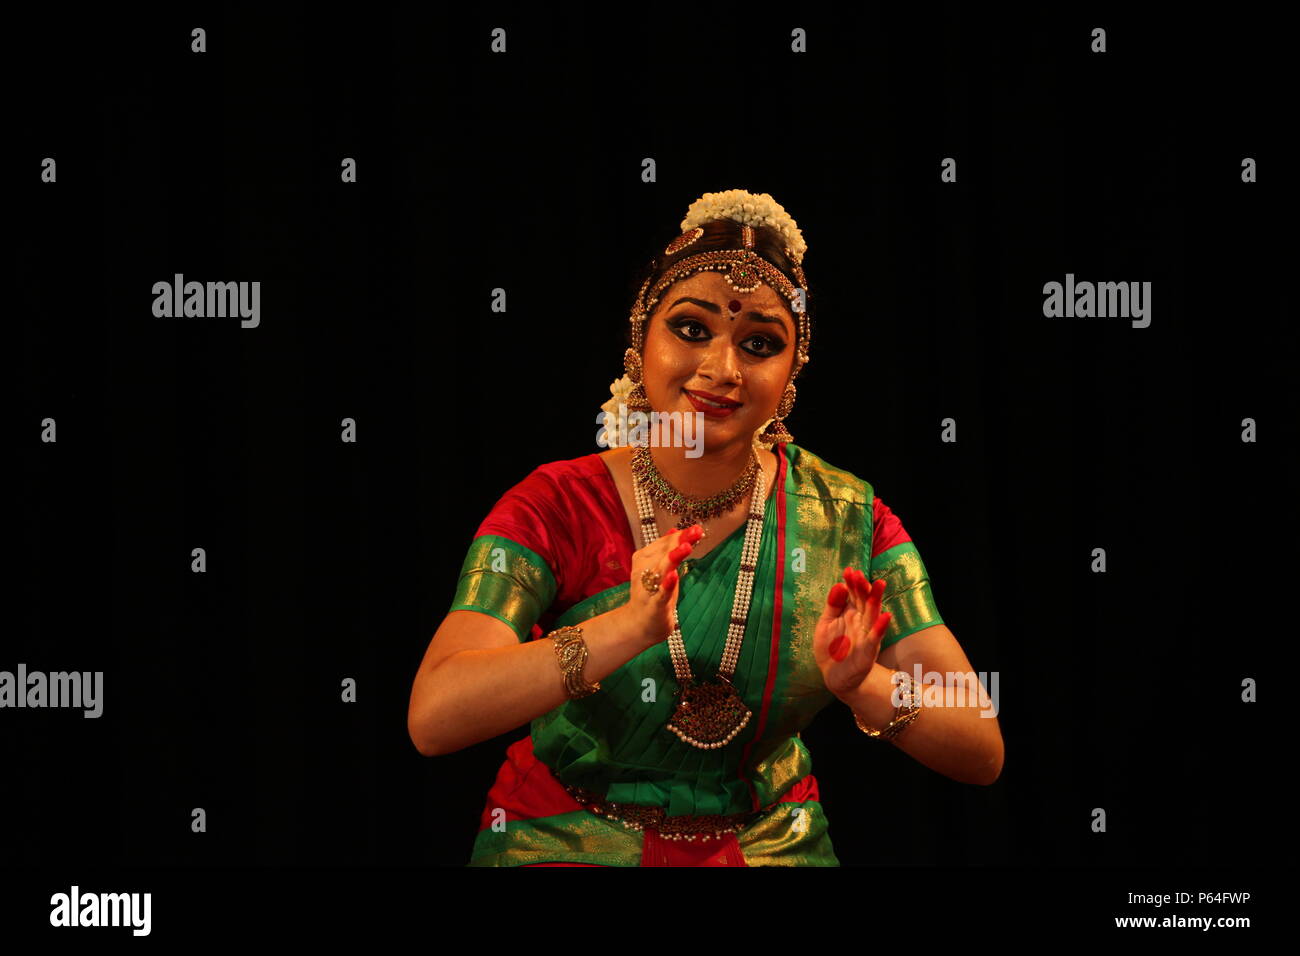 bharatha natyam is one of the classical dance forms of india from the state tamil naduit is popular not only in india but the whole world P64FWP